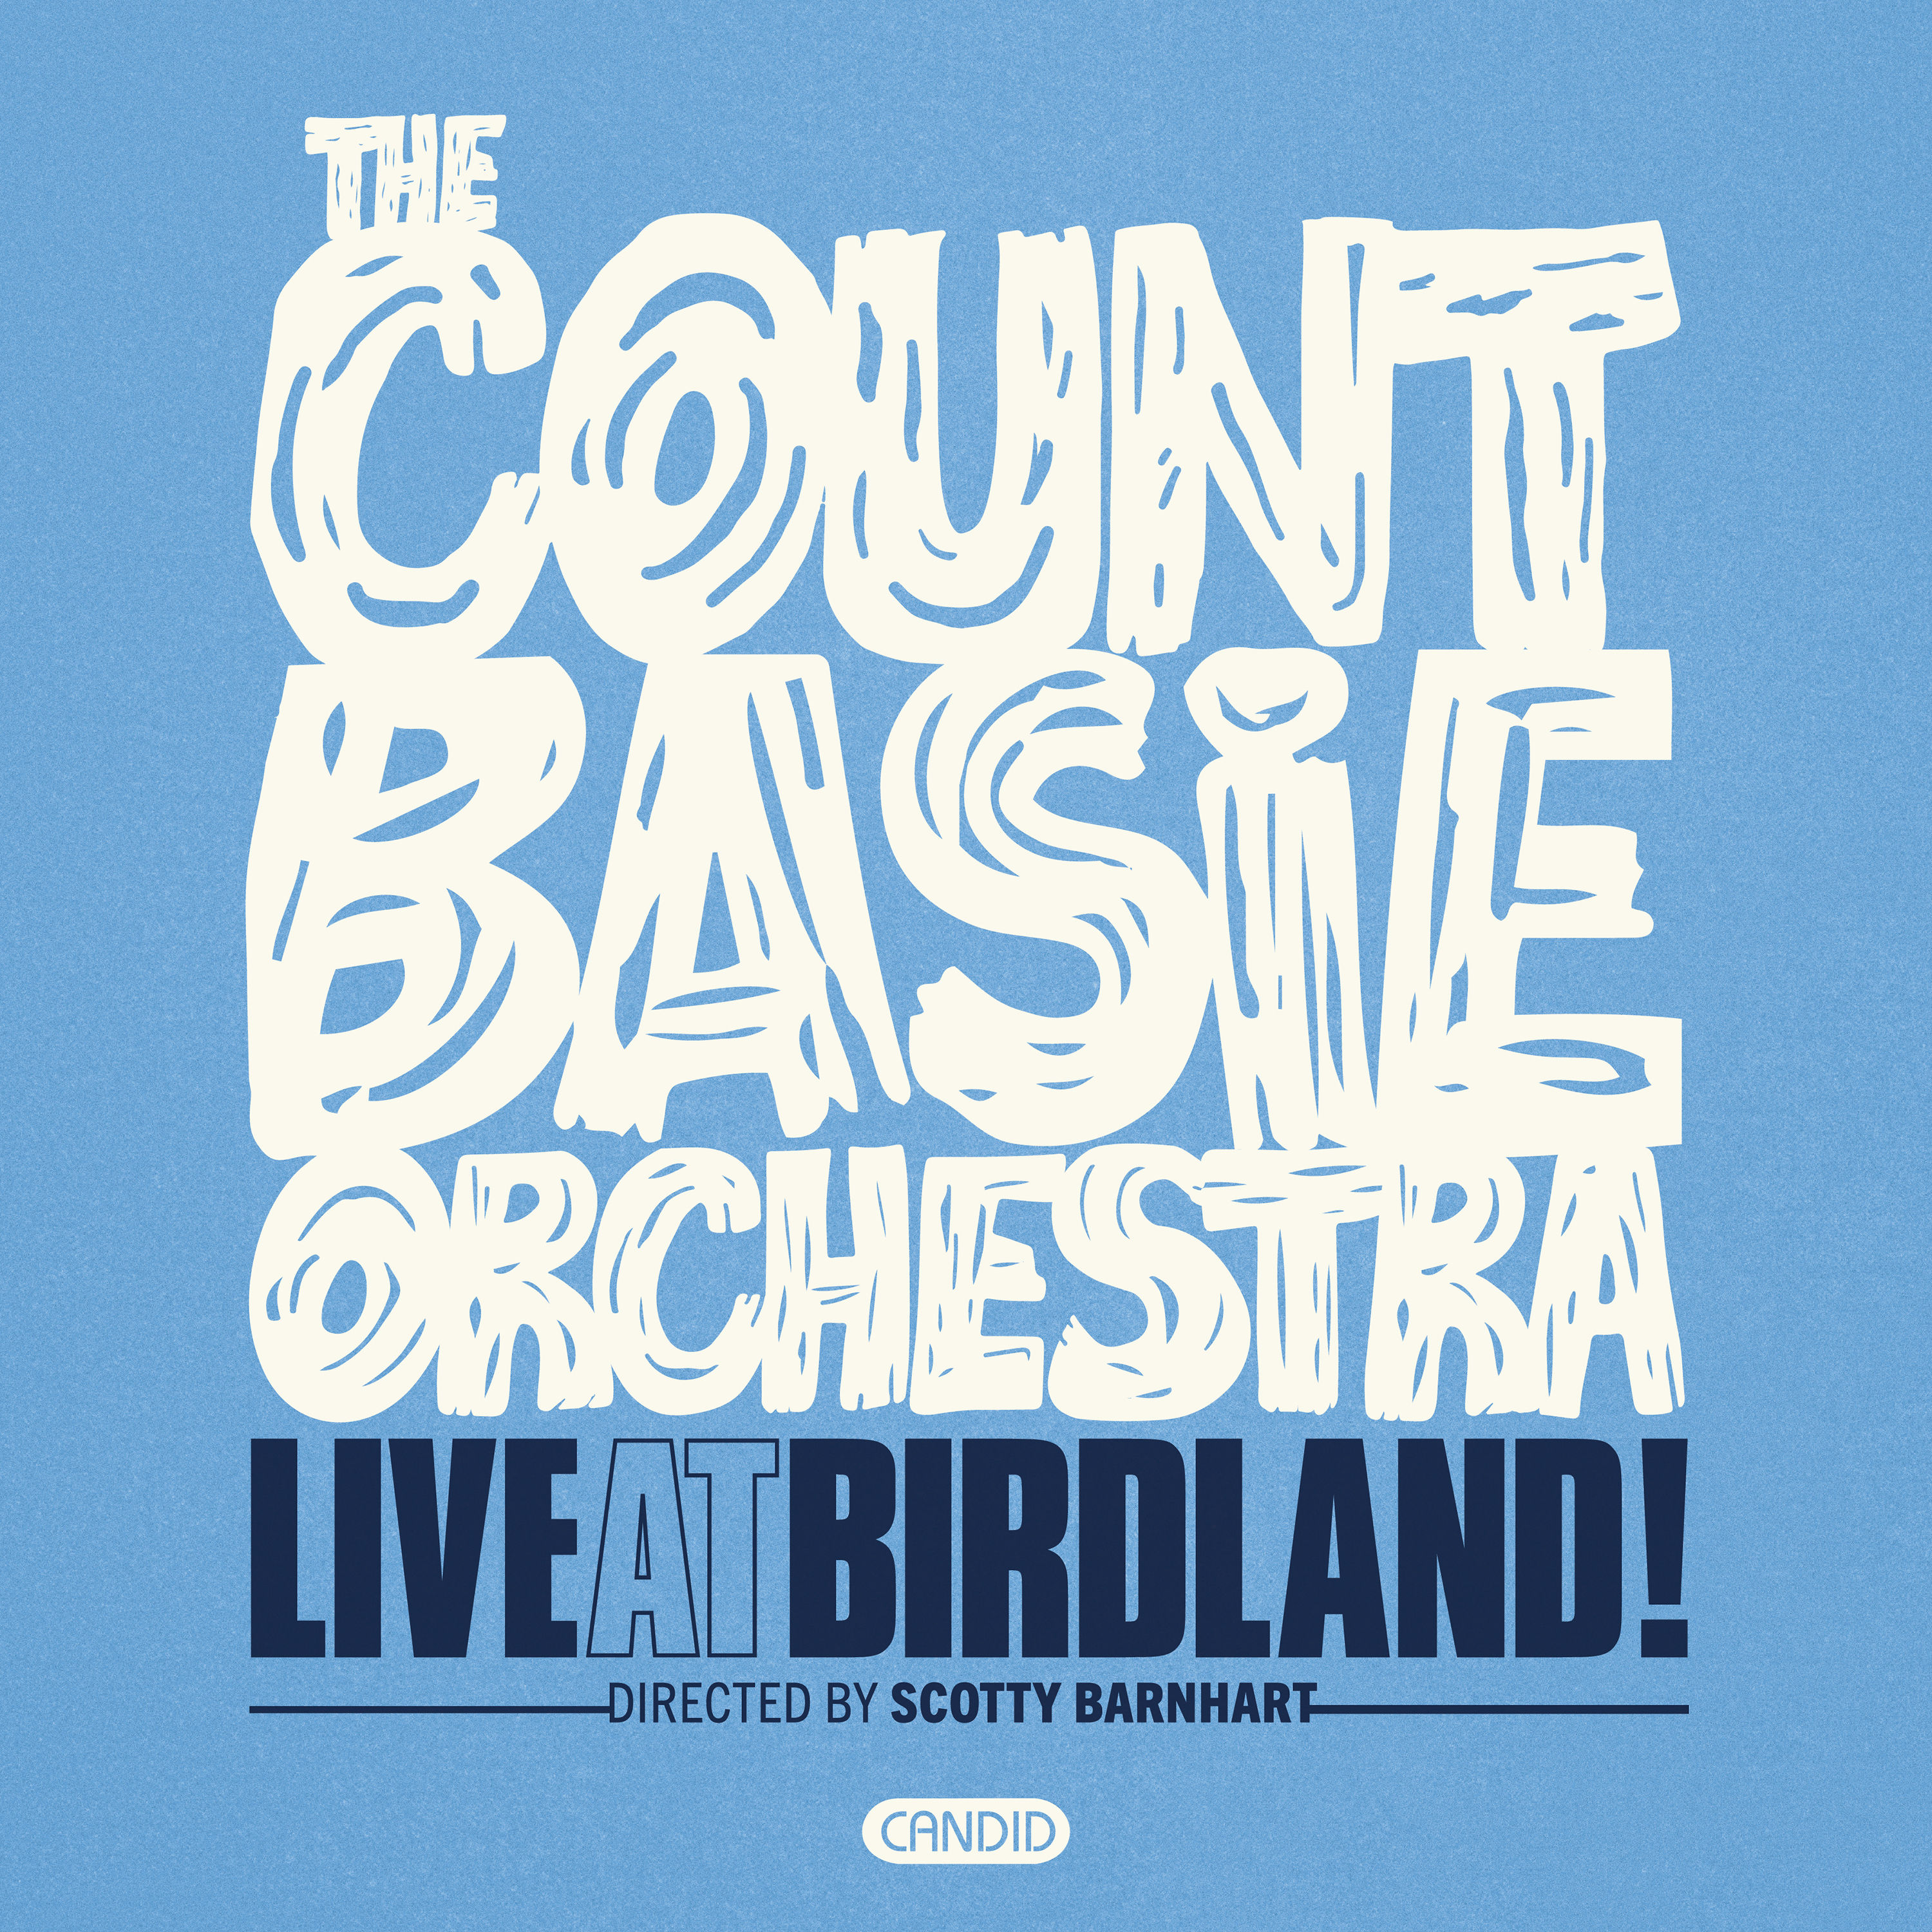 The Count Basie Orchestra – Live At Birdland (2021) [FLAC 24bit/96kHz]